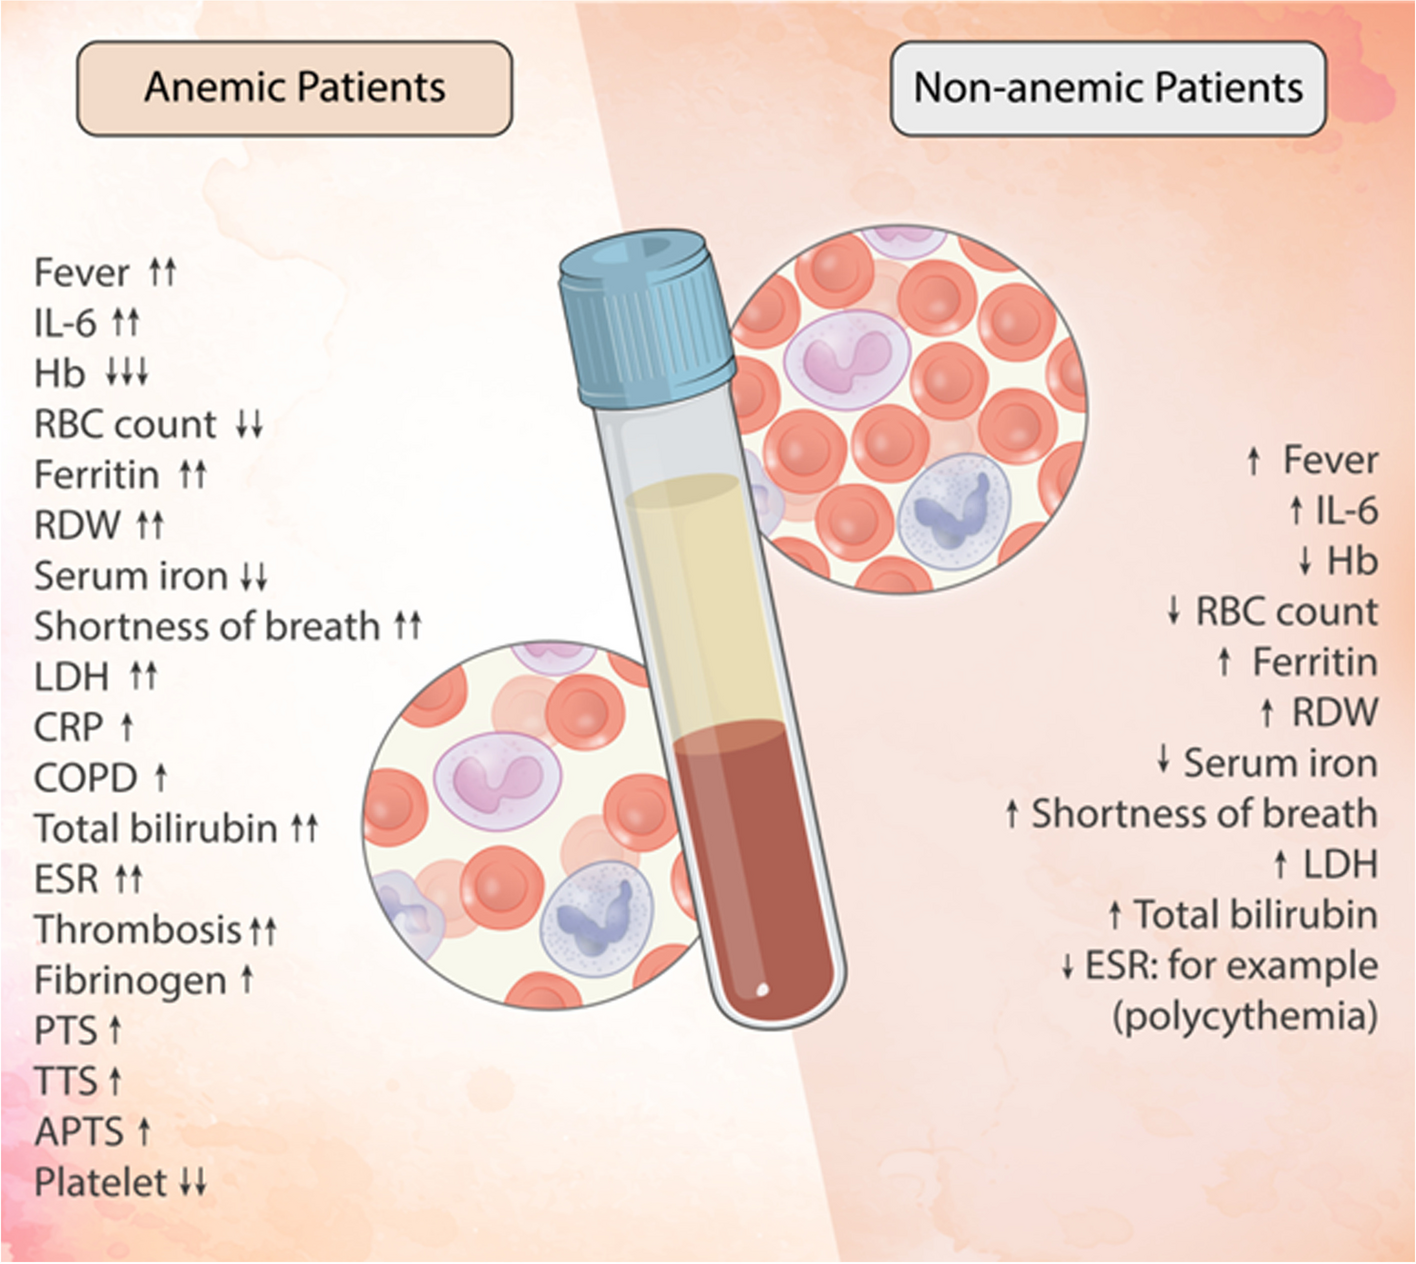 COVID-19 in patients with anemia and haematological malignancies: risk factors, clinical guidelines, and emerging therapeutic approaches